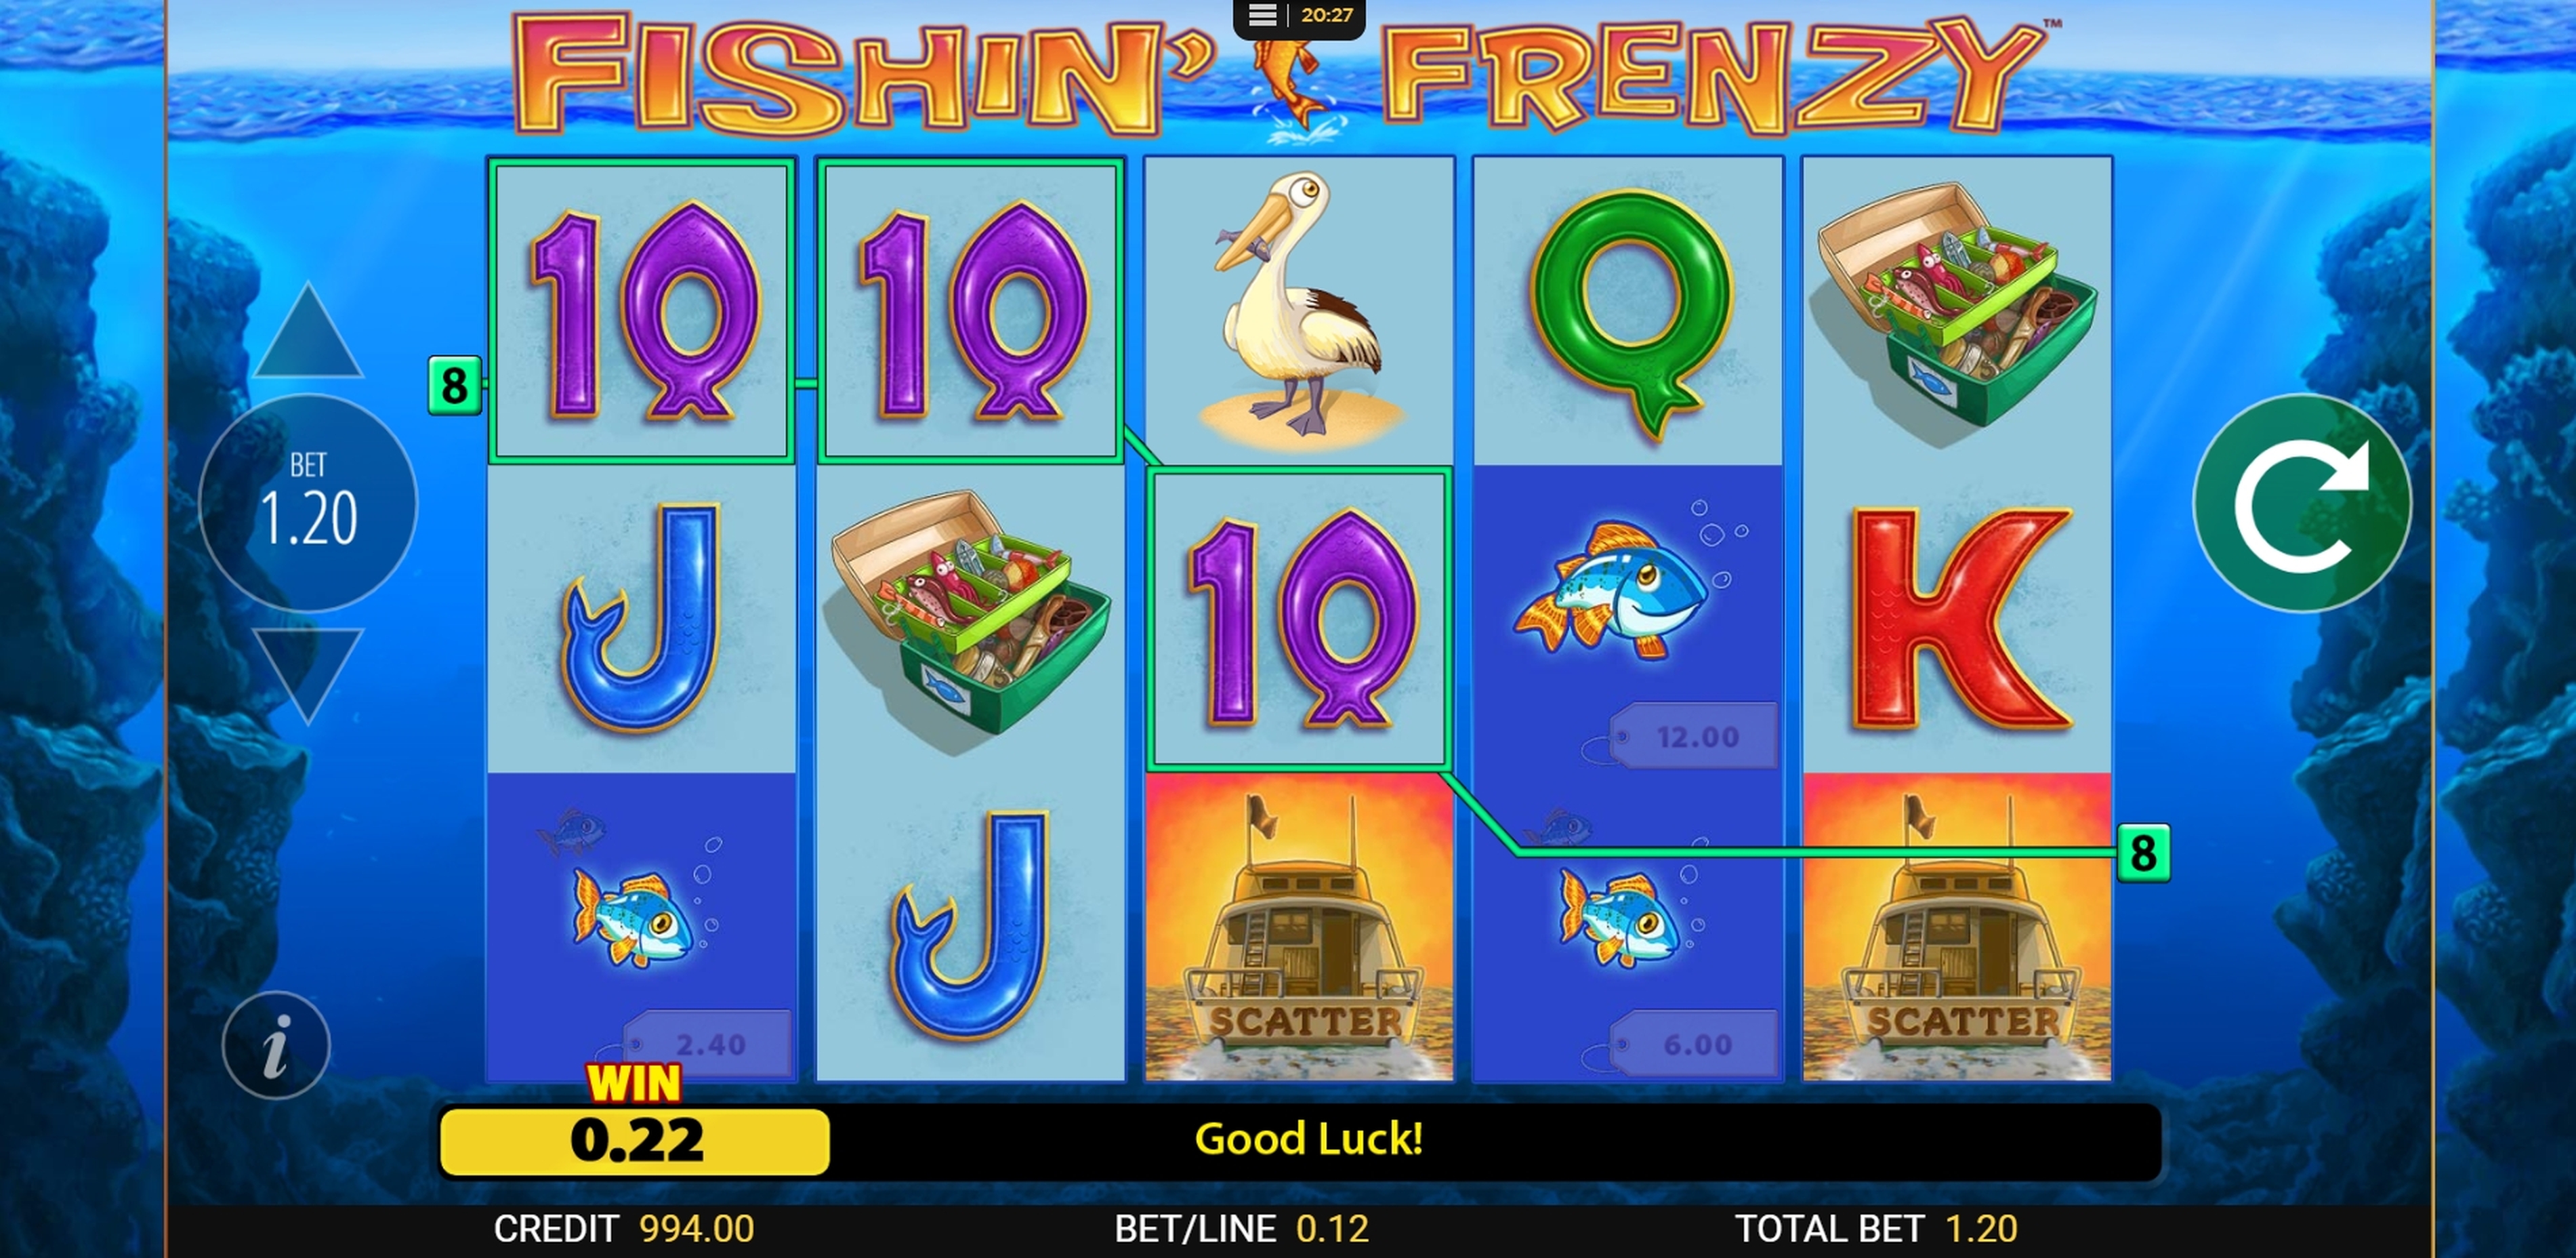 Win Money in Fishin' Frenzy Free Slot Game by Reel Time Gaming